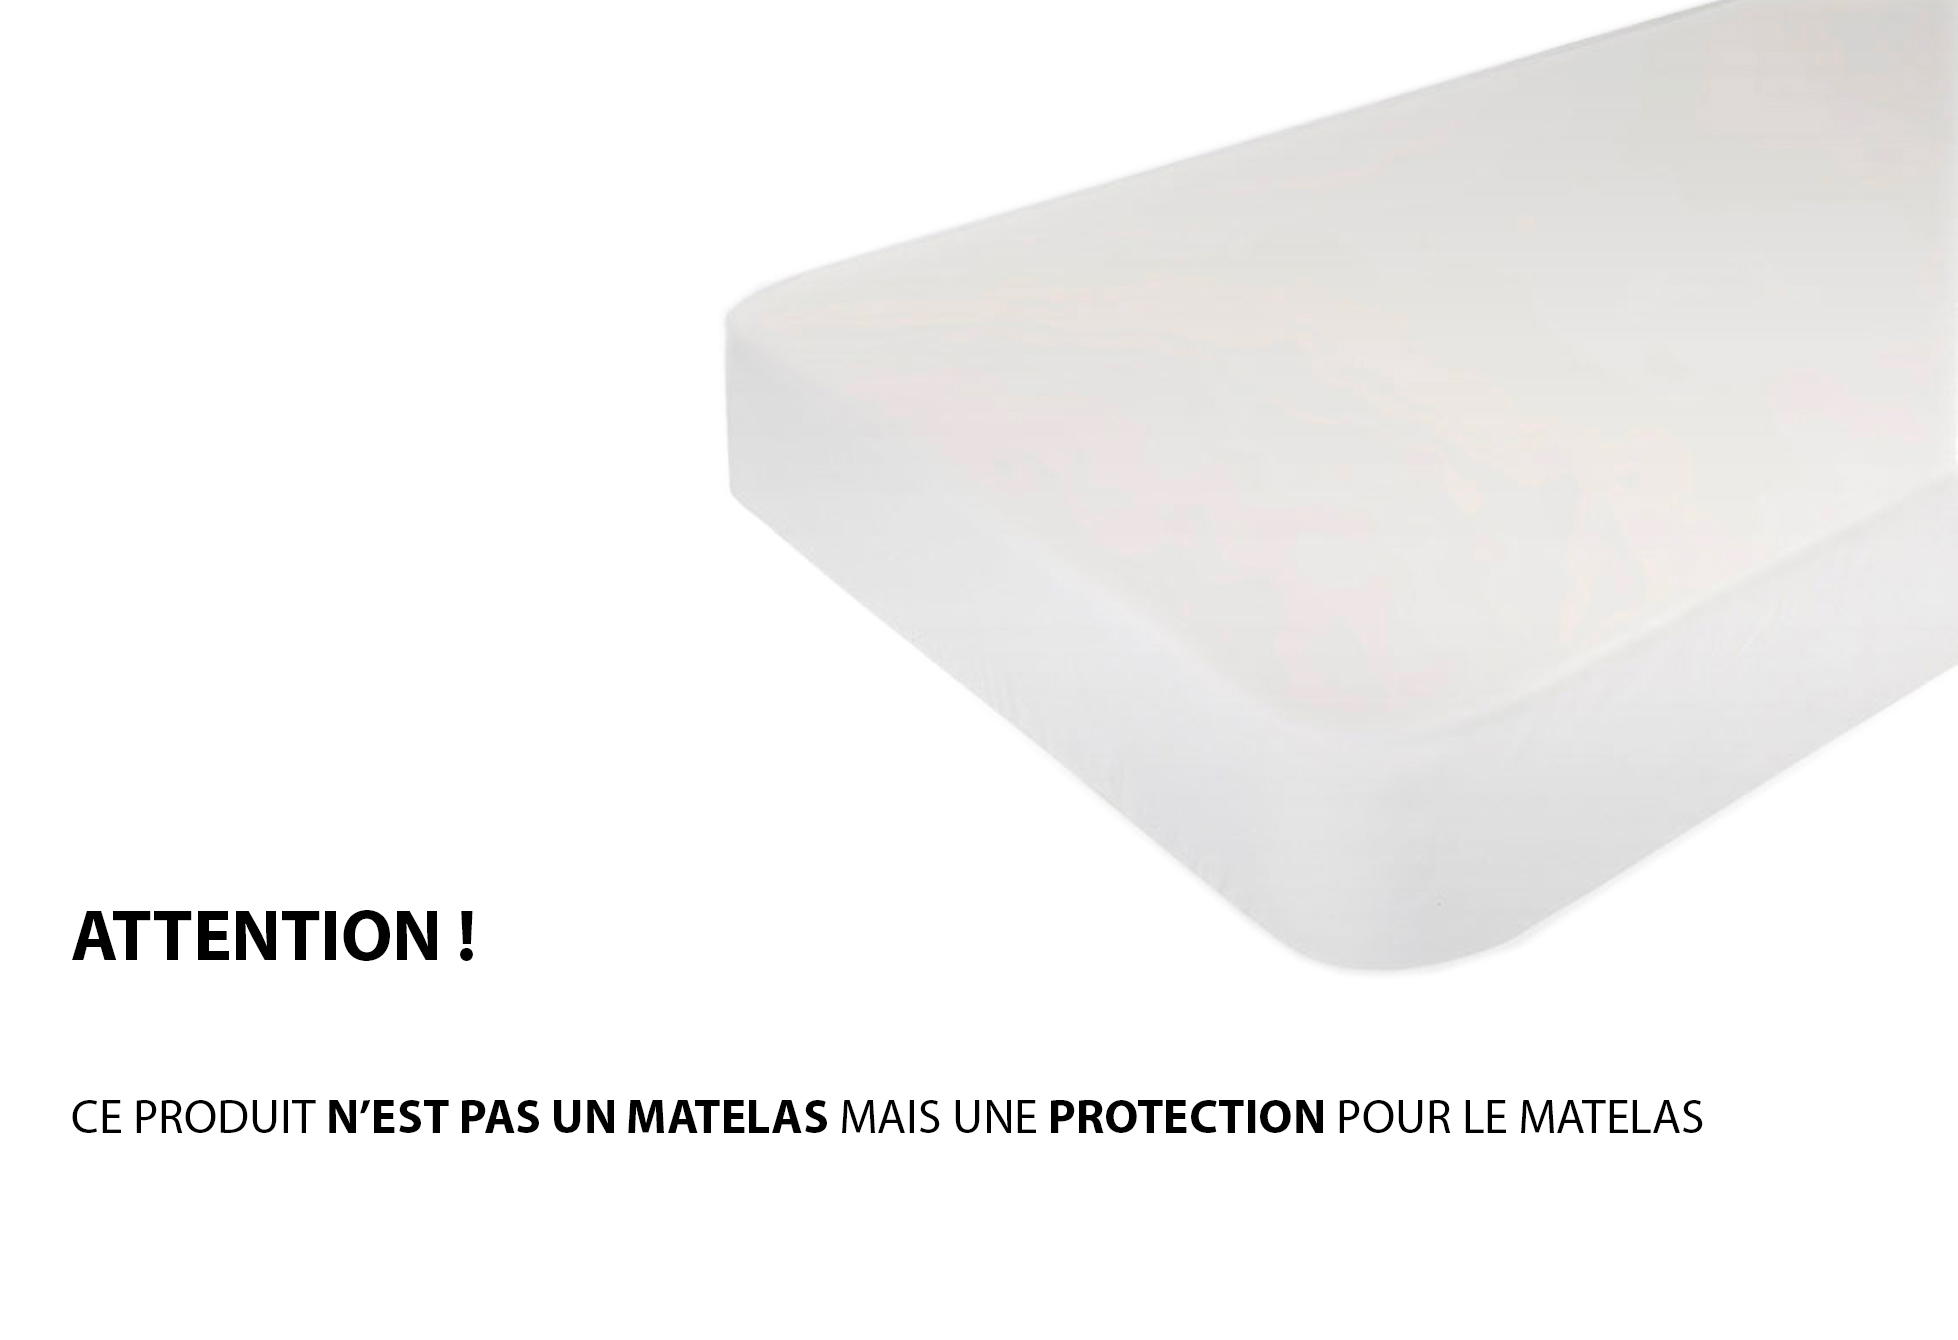 Protège matelas Moshy PROTECTION MARBELLA  160x200 (Queen size)